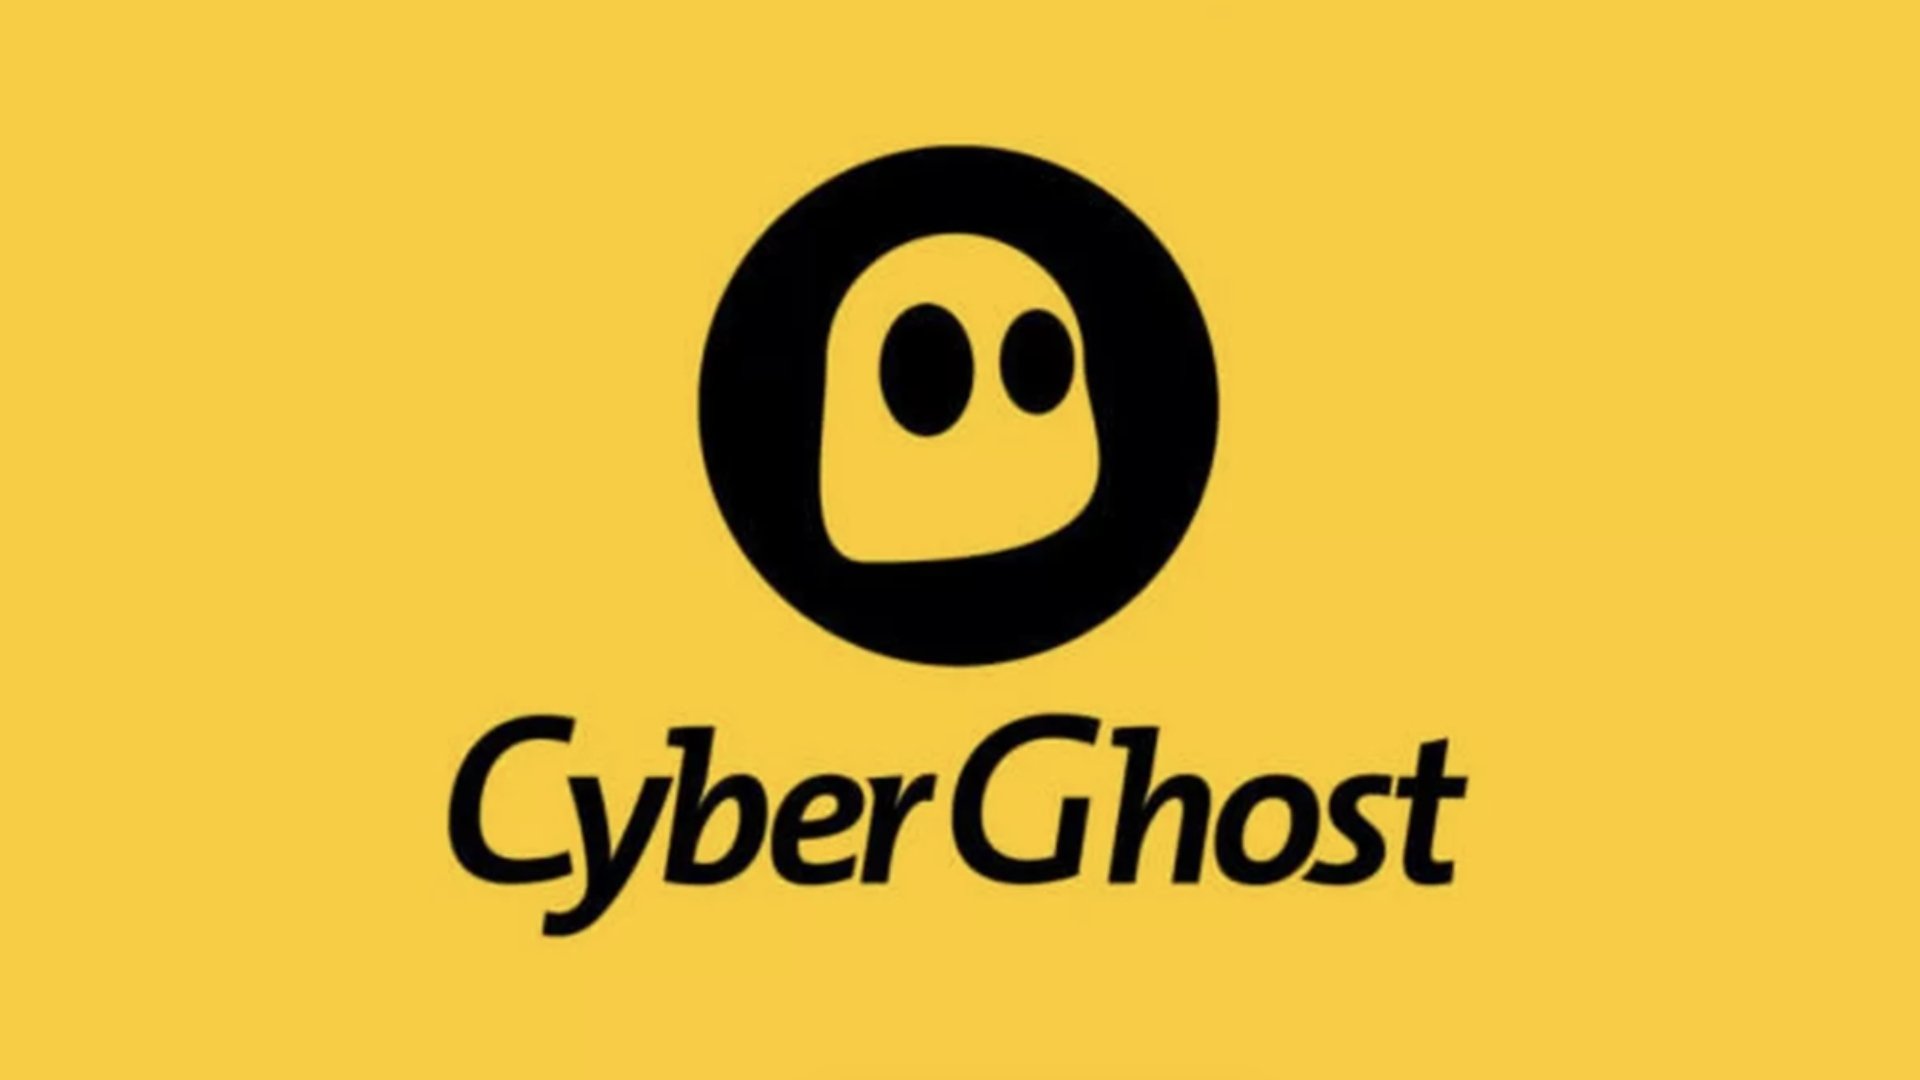 Best Amazon Prime VPN: CyberGhost. Image shows the company logo.